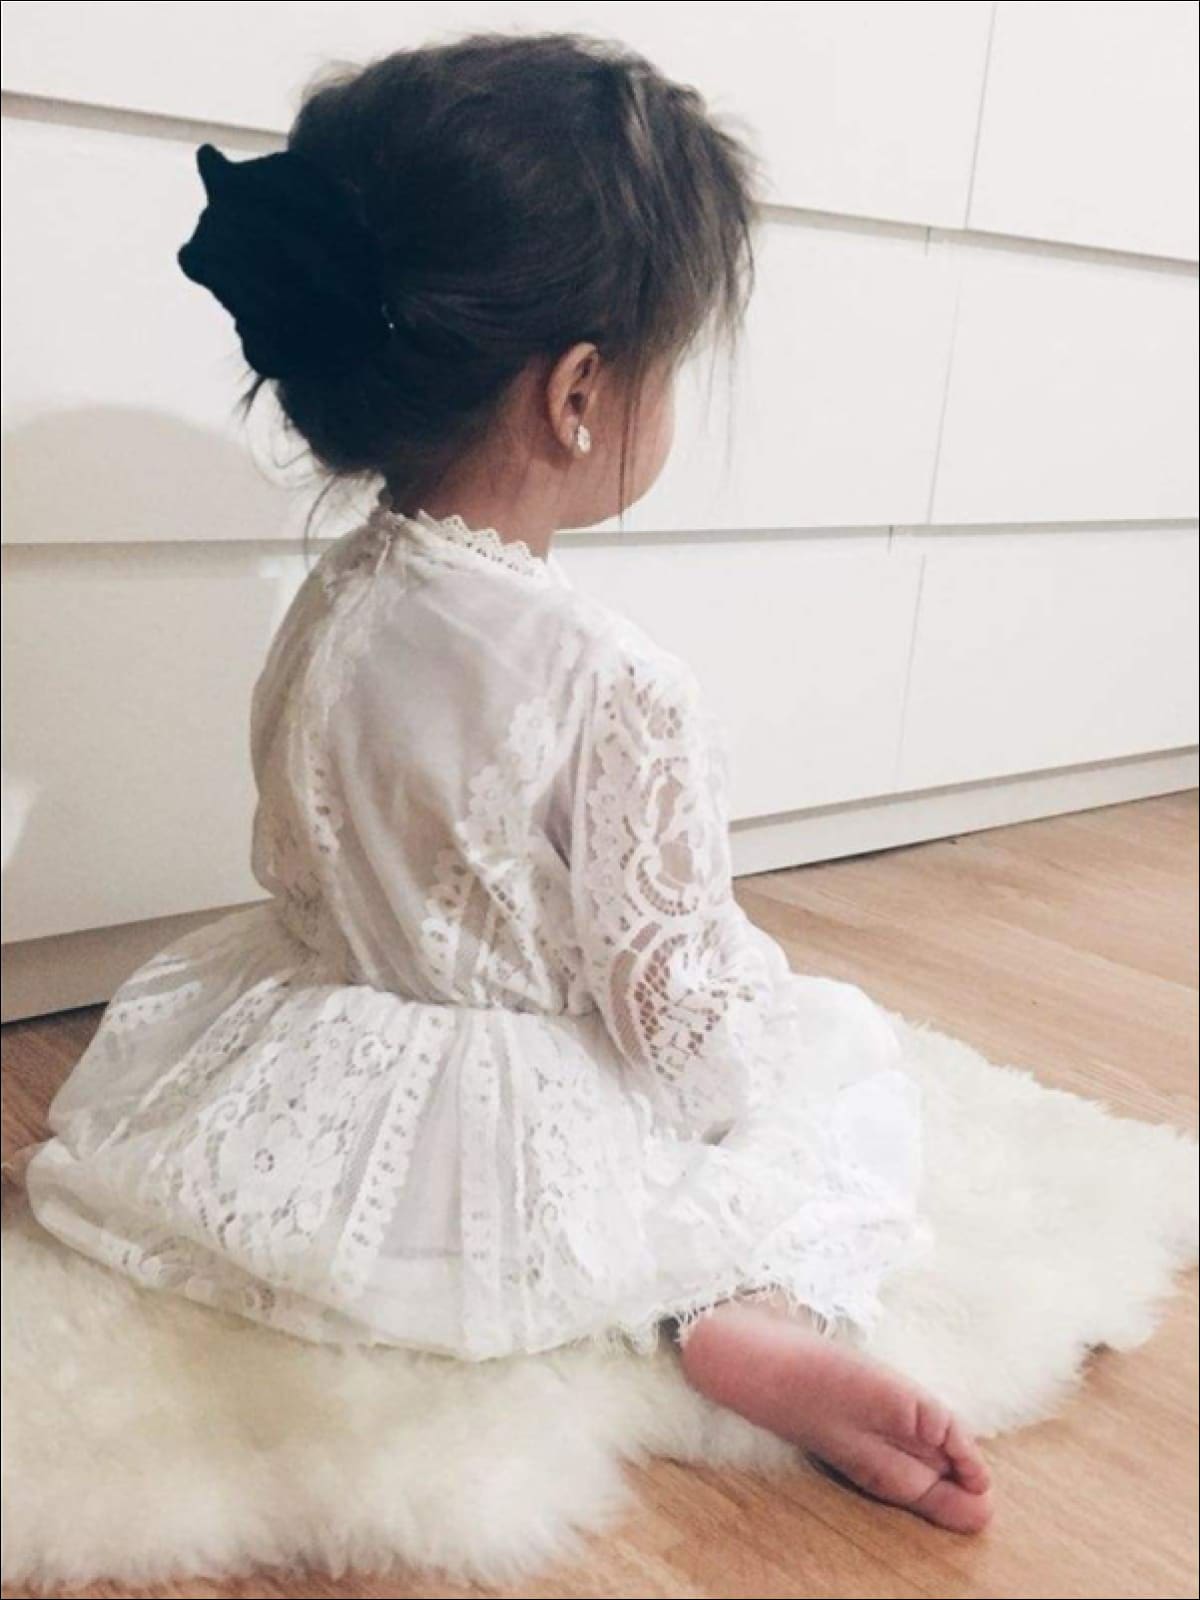 Girls White Long Sleeves Lace Dress ( 2 colors option ) Girls Spring Casual Dress